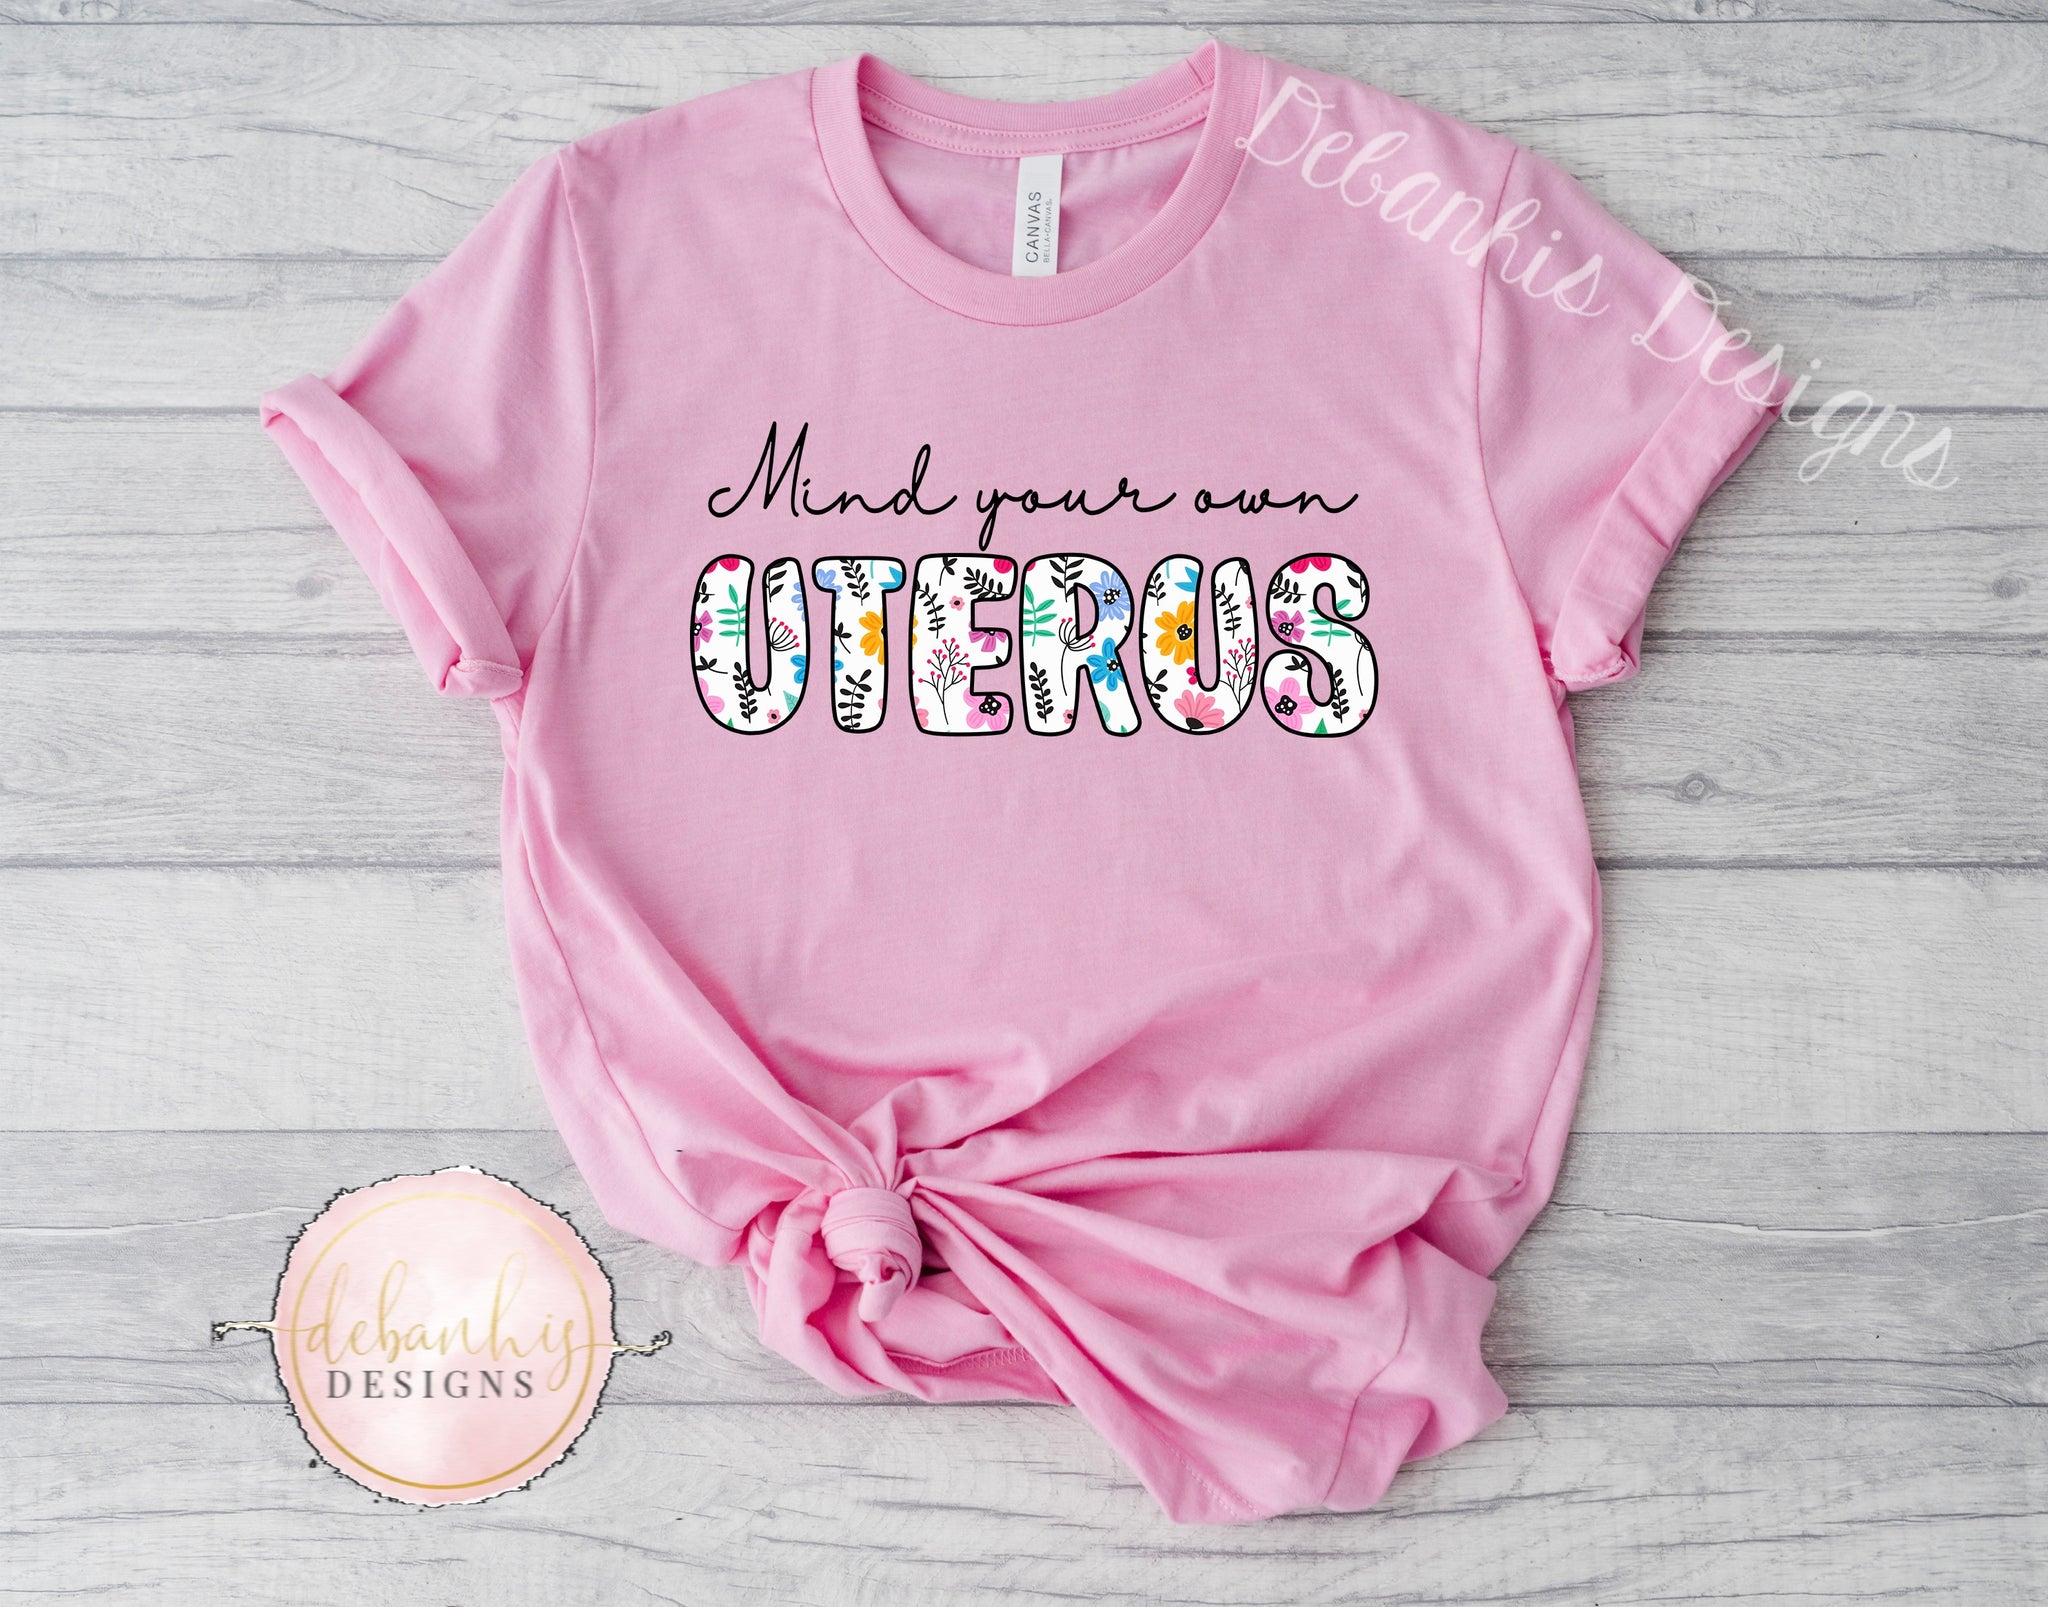 Mind your own uterus T-Shirt kid/adult size